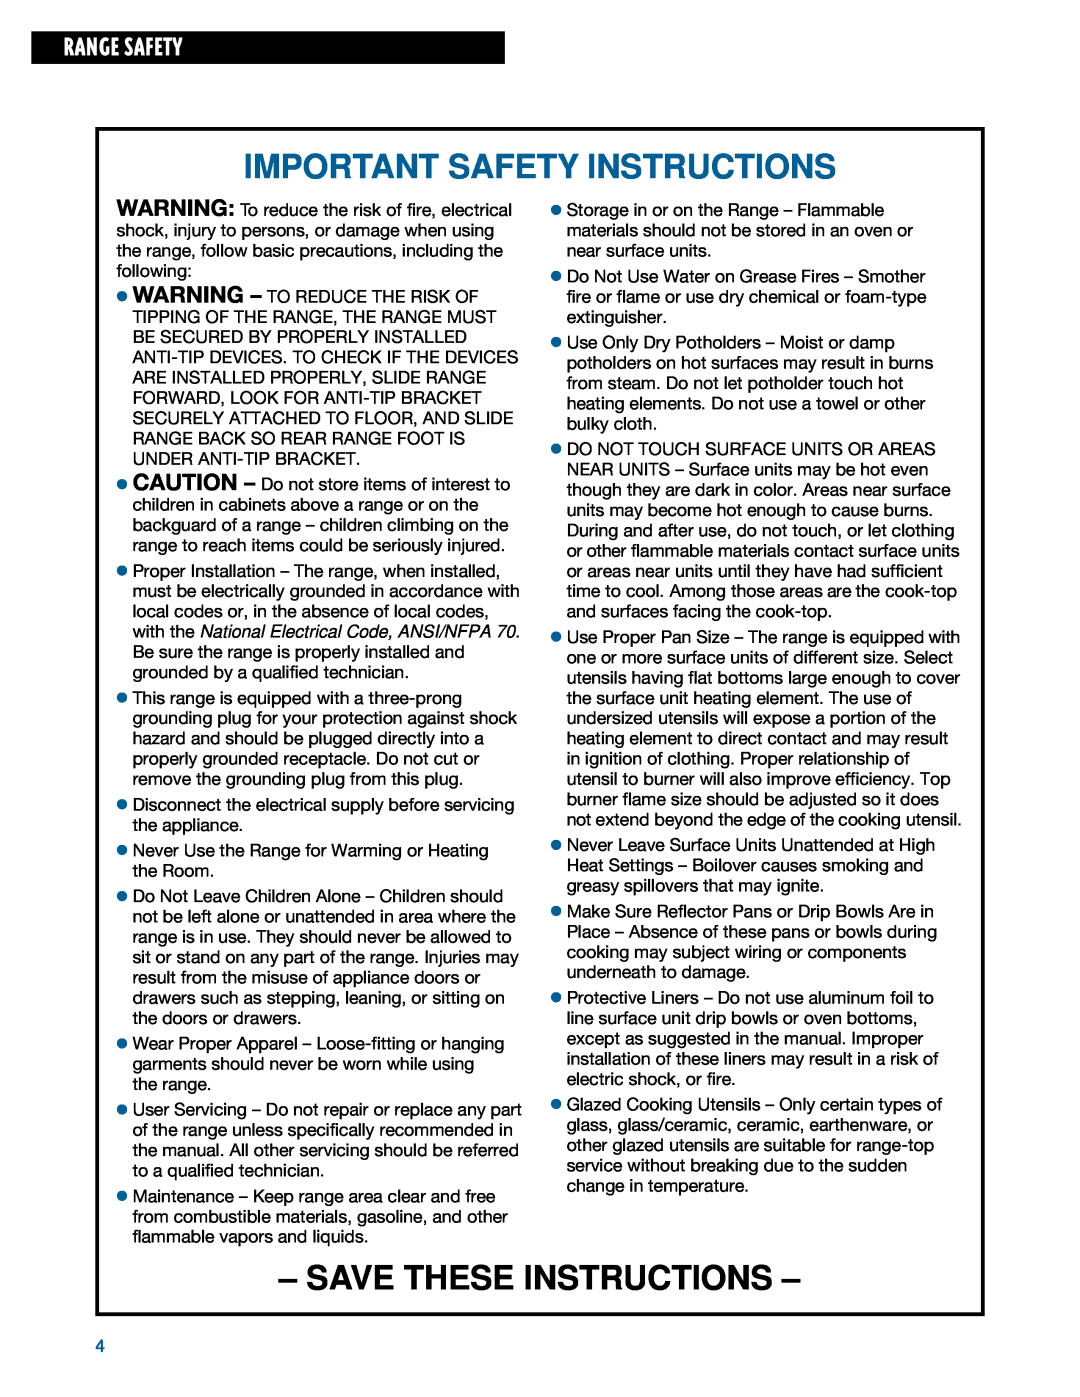 Whirlpool TGS325E manual Important Safety Instructions, Save These Instructions, Range Safety 